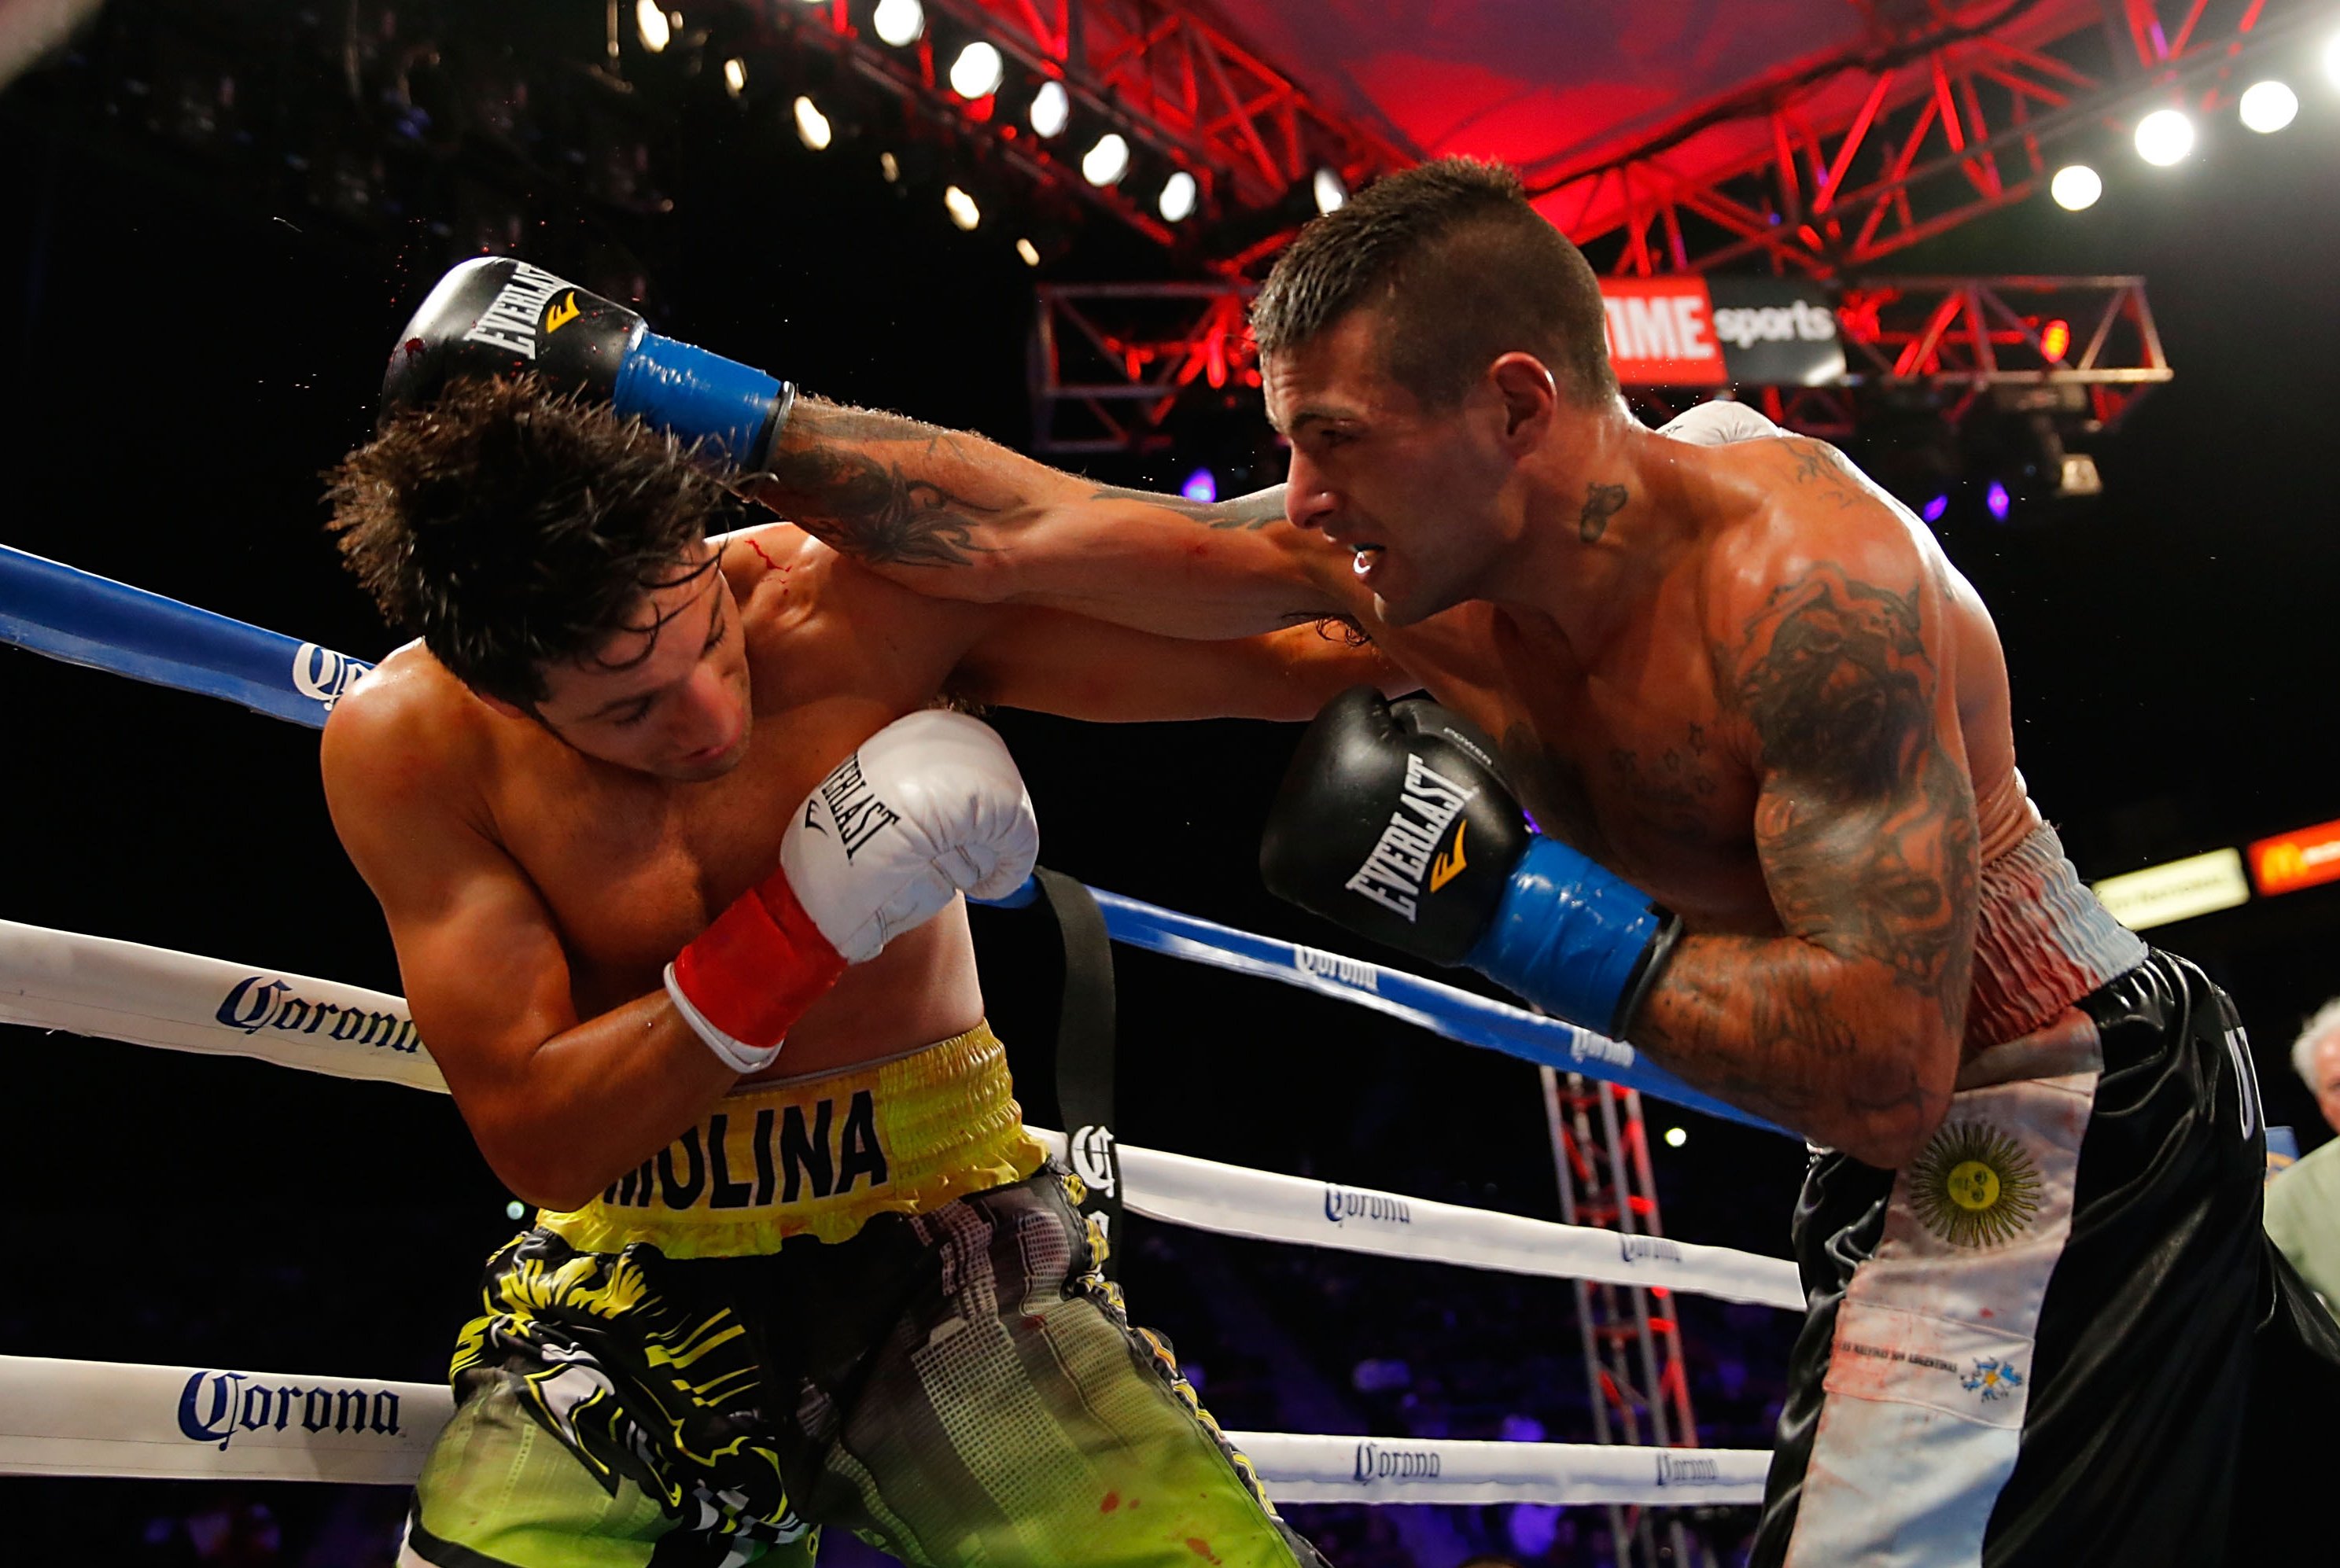 Biggest puncher of them all? Deontay Wilder's frightening power is unmatched